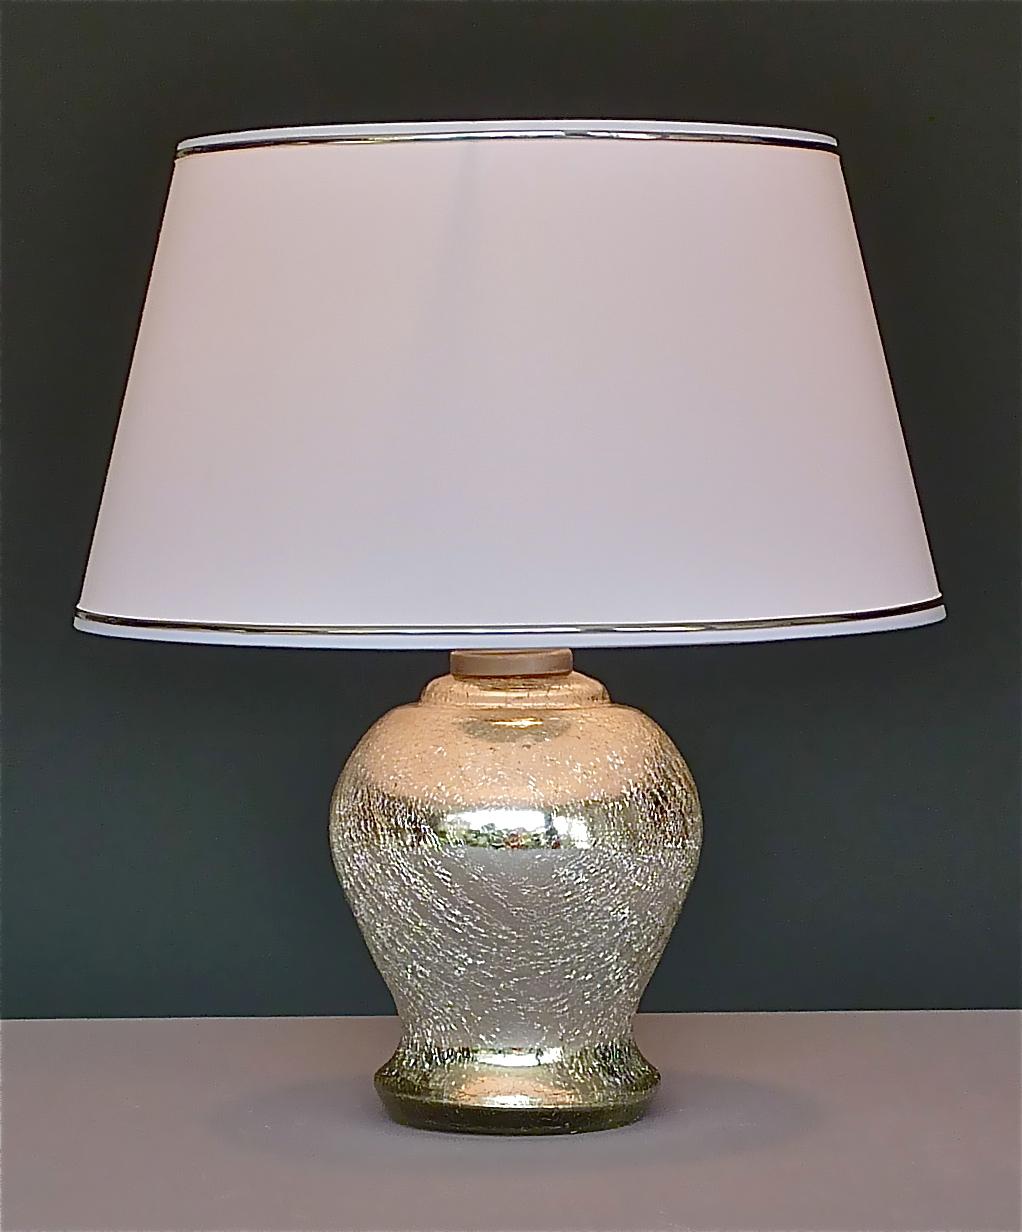 Rare Modernism Art Deco Table Lamp Silver Crackle Glass White Chrome France 1930 For Sale 4